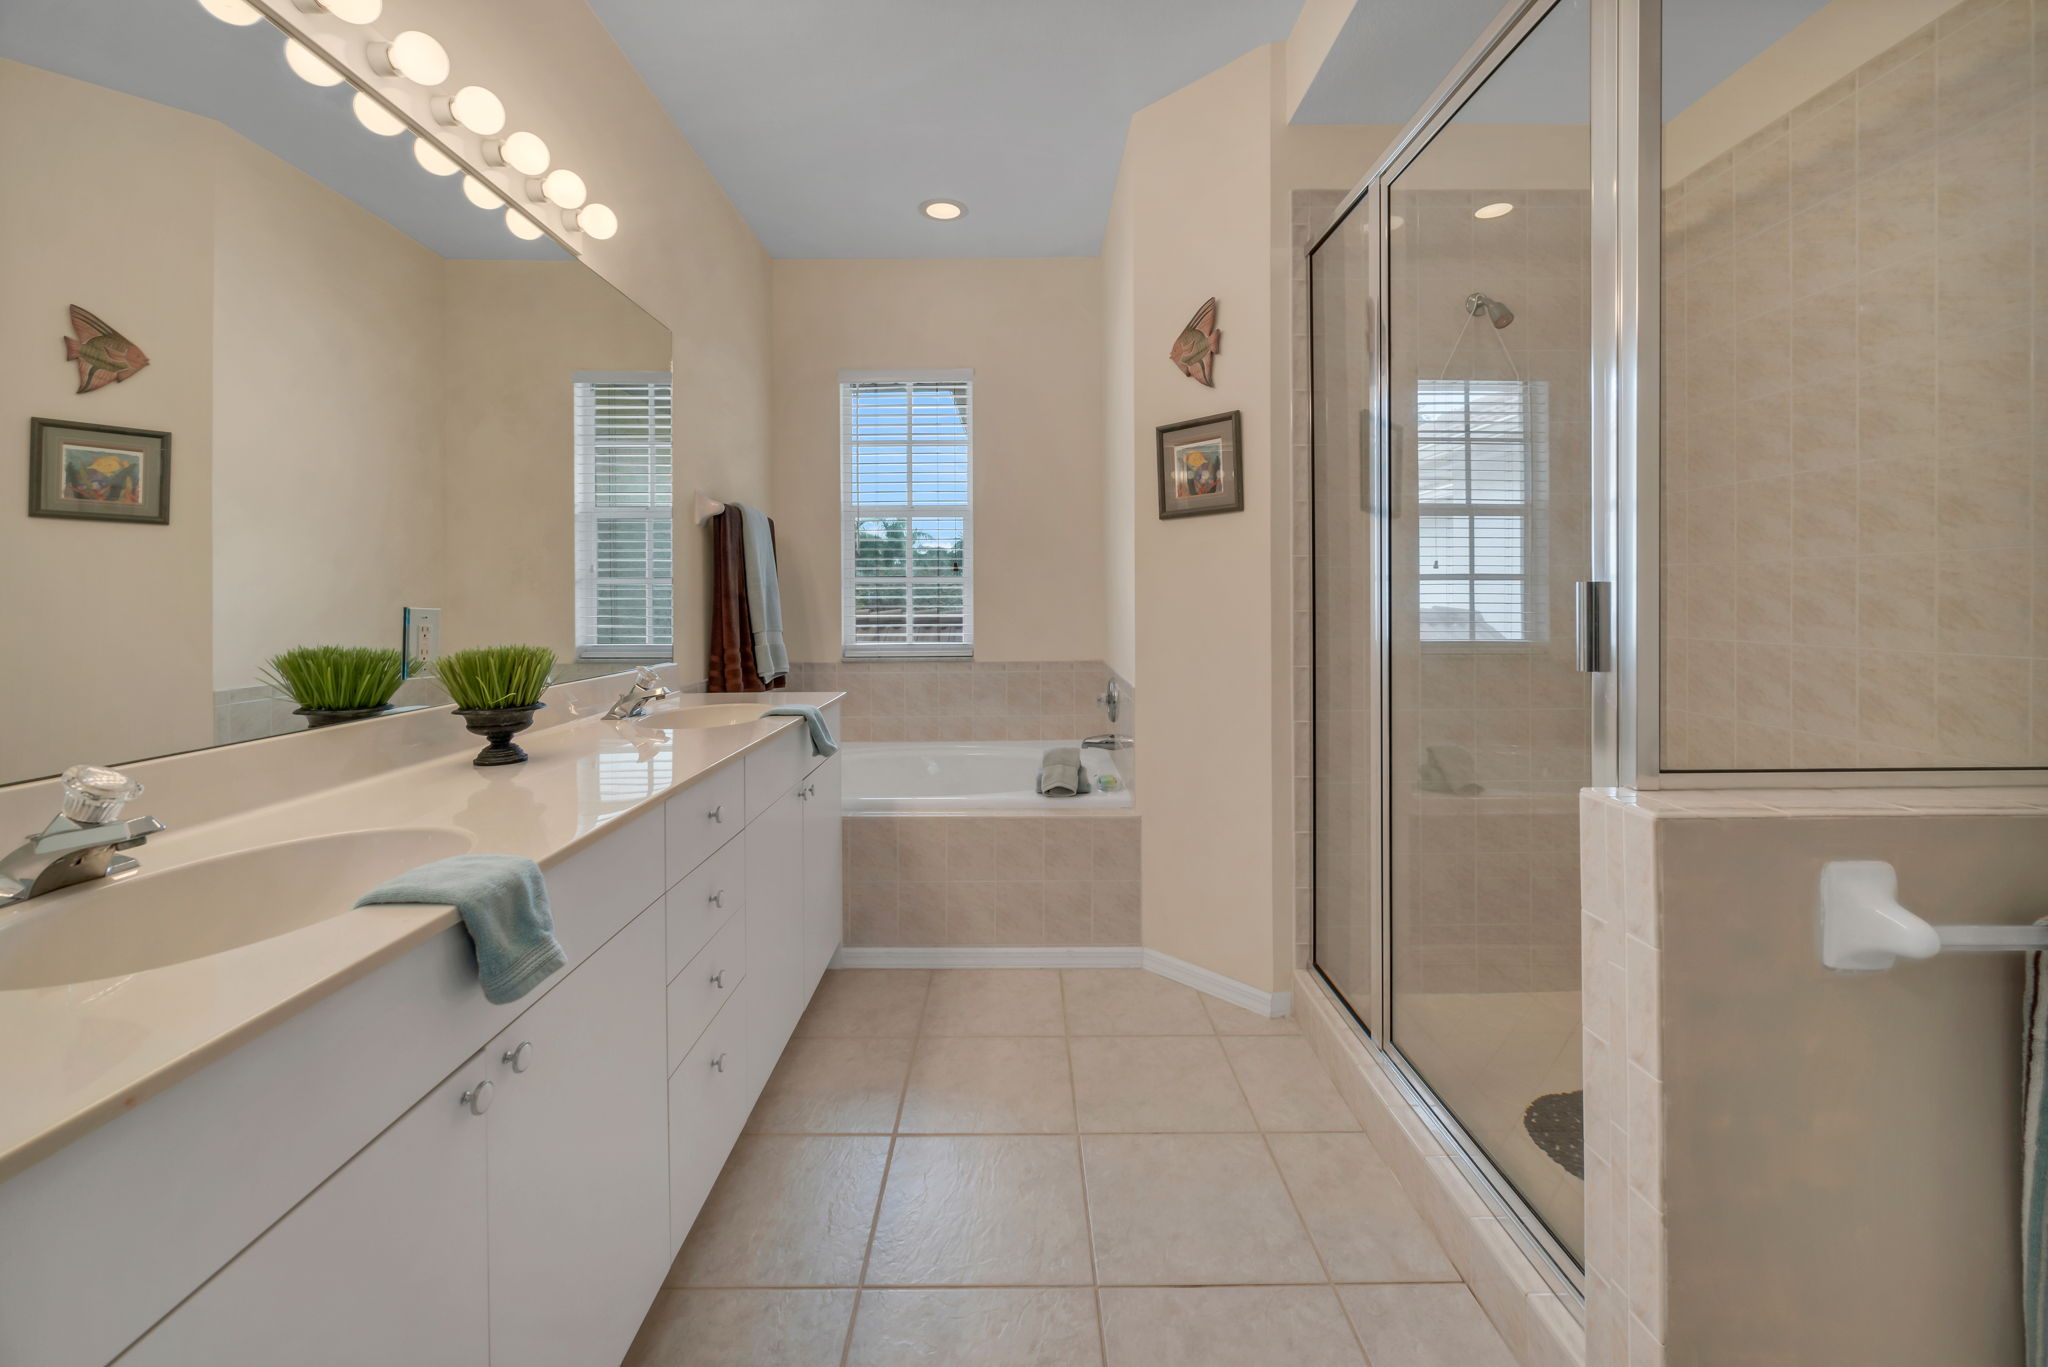 Primary Bathroom with plenty of natural light